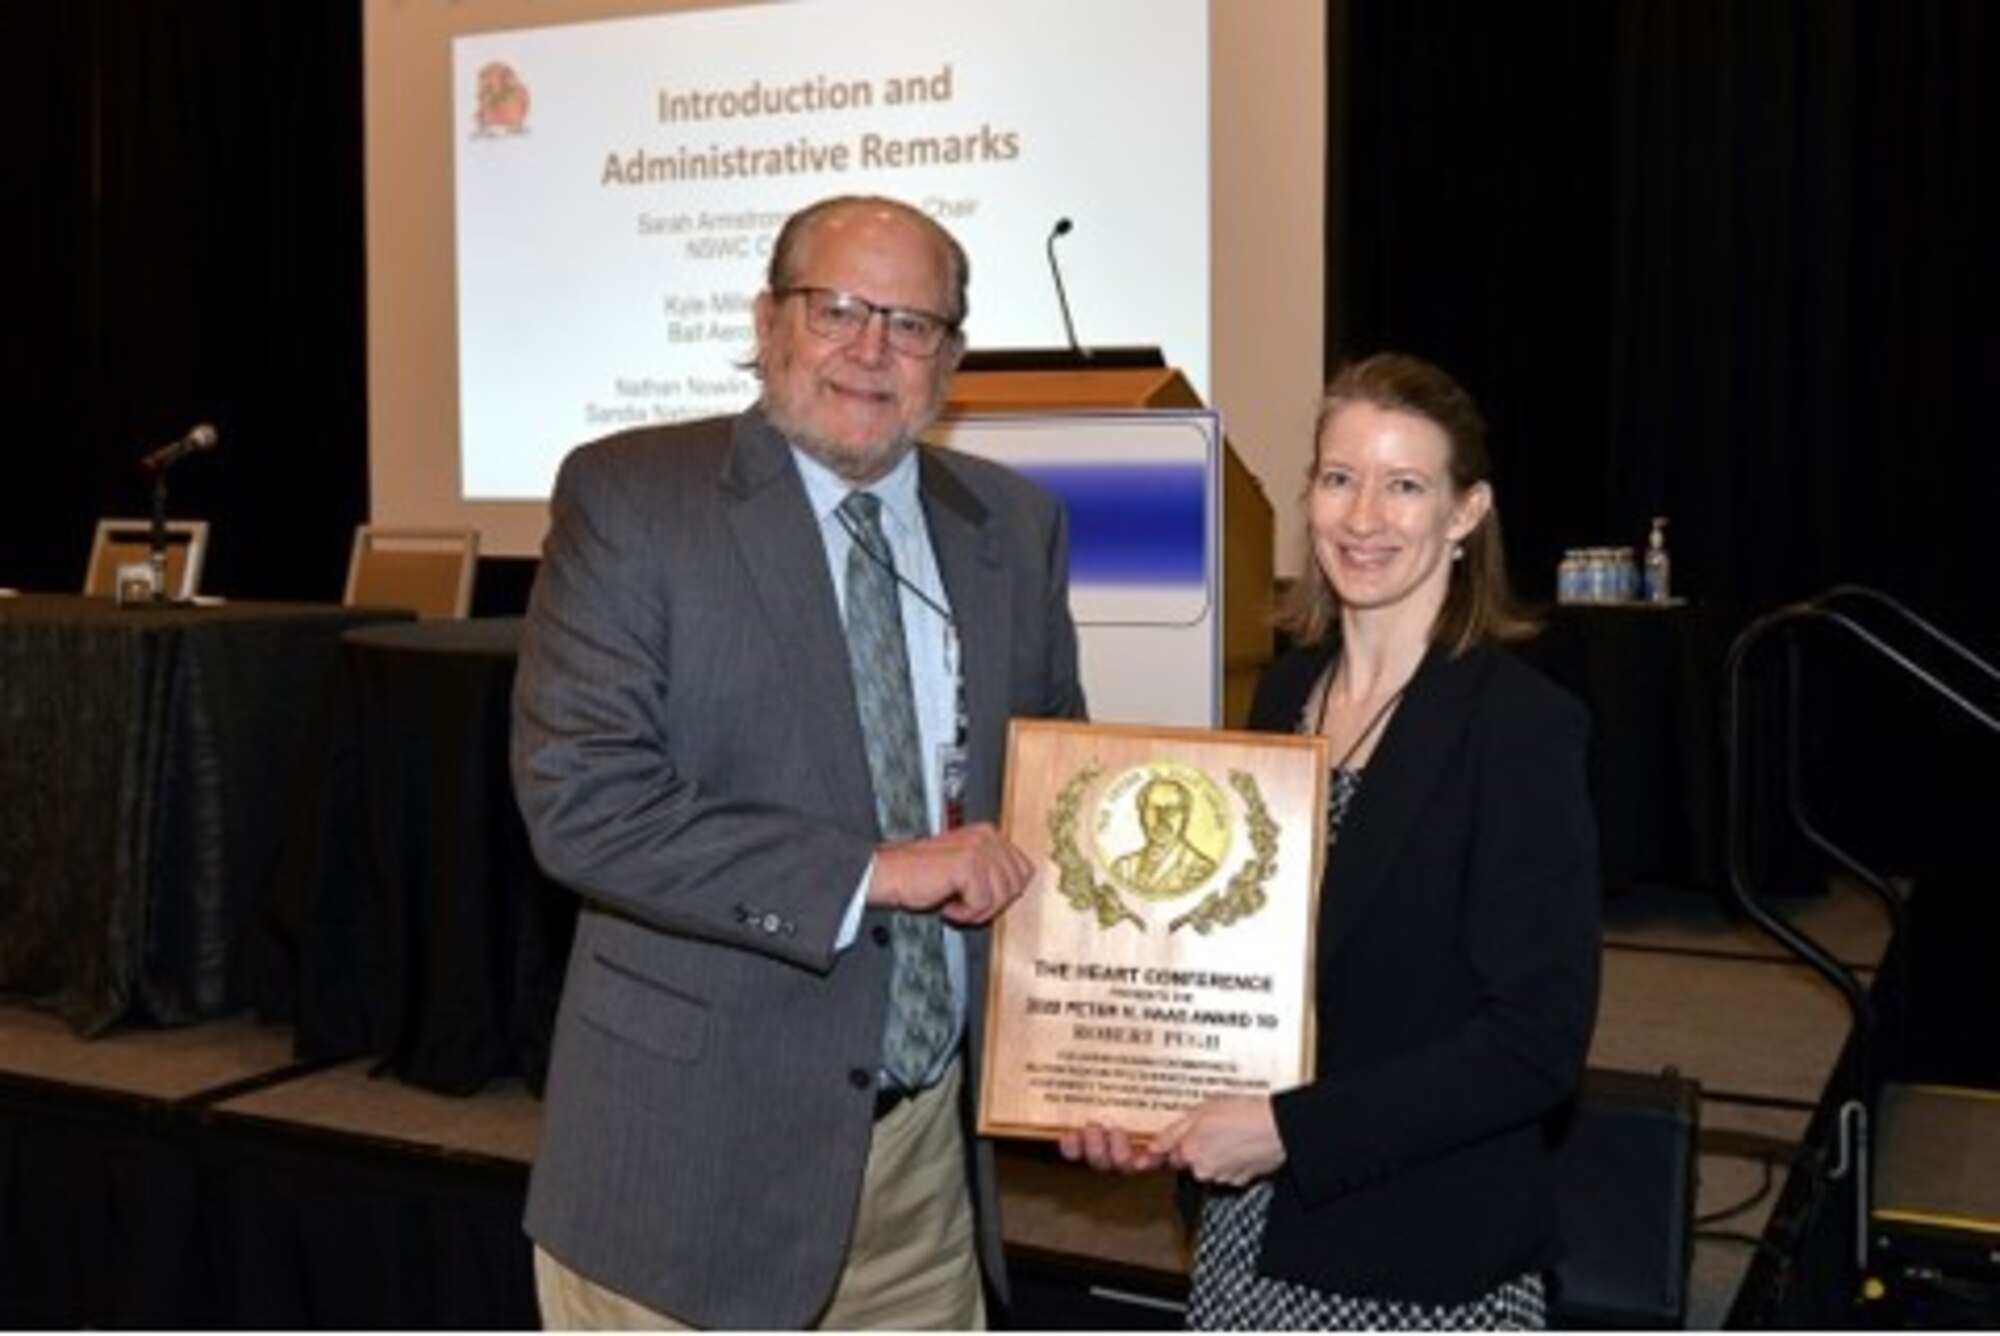 Dr. Robert Pugh receives the 2022 Peter Haas Hardened Electronics and Radiation Technology award for superior achievement from Dr. Sarah Armstrong, the President of the HEART Society, at the 2022 HEART Conference held in March at Tarrytown, New York. (Courtesy photo)